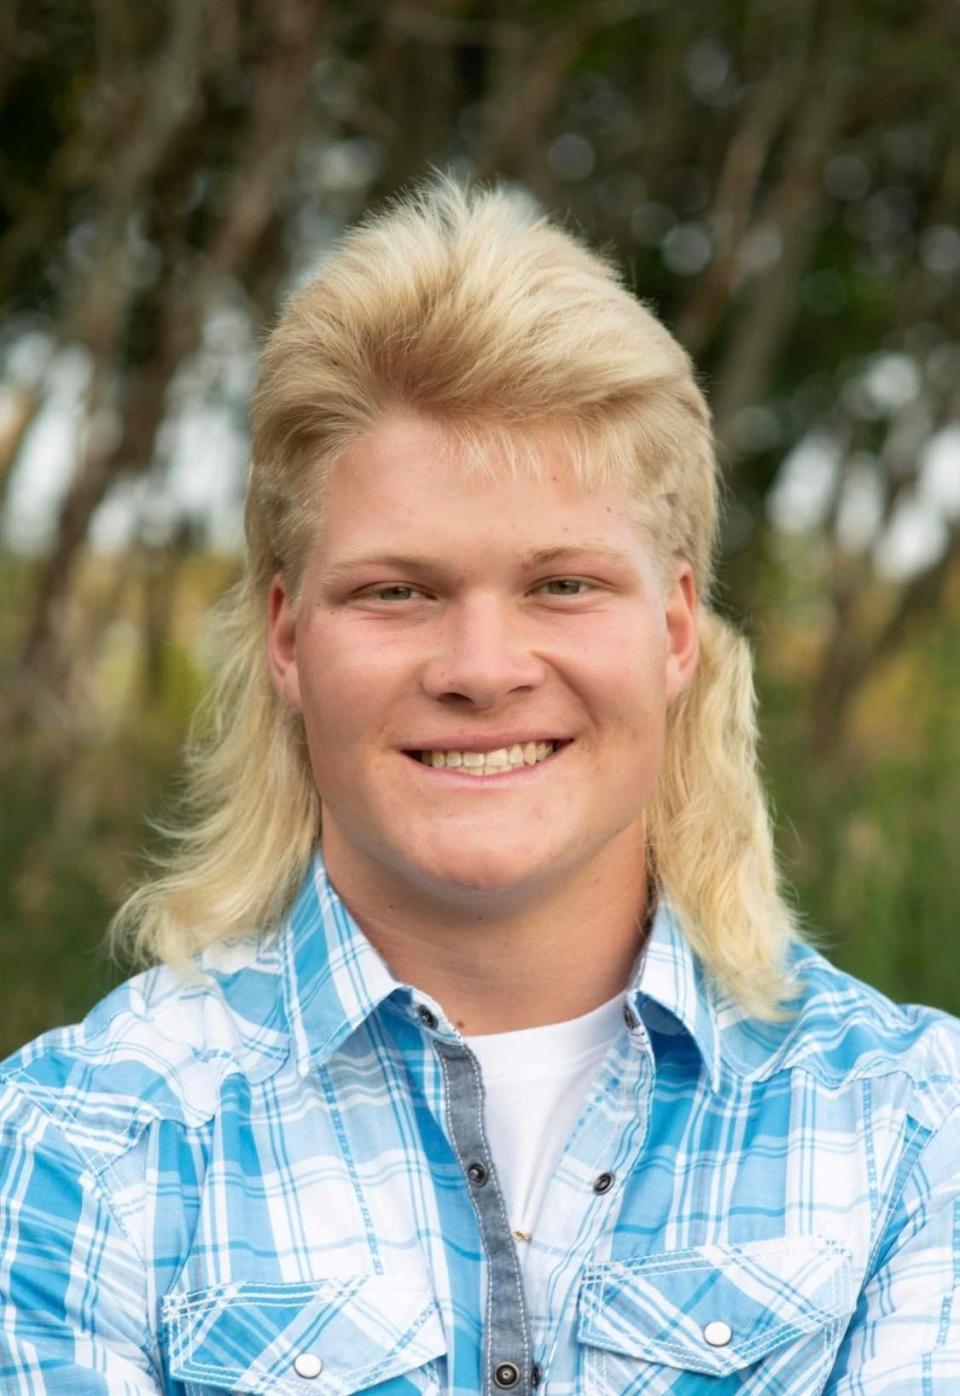 Cayden Kershaw, 18 of Wausau, poses for his submission photos for the 2022 USA Mullet Championships.